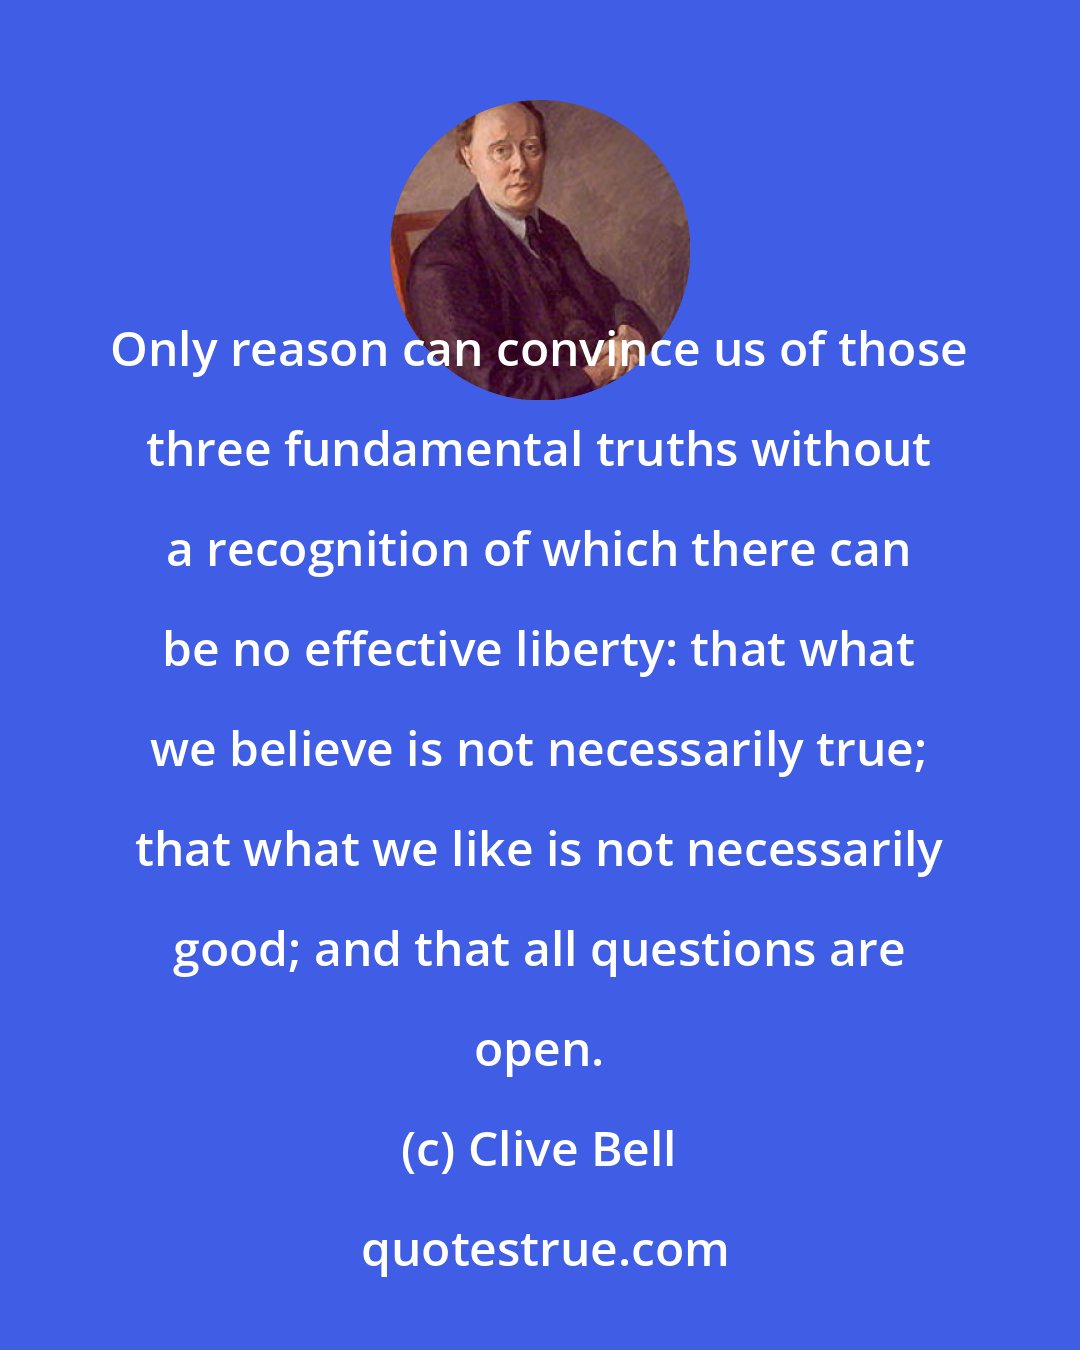 Clive Bell: Only reason can convince us of those three fundamental truths without a recognition of which there can be no effective liberty: that what we believe is not necessarily true; that what we like is not necessarily good; and that all questions are open.